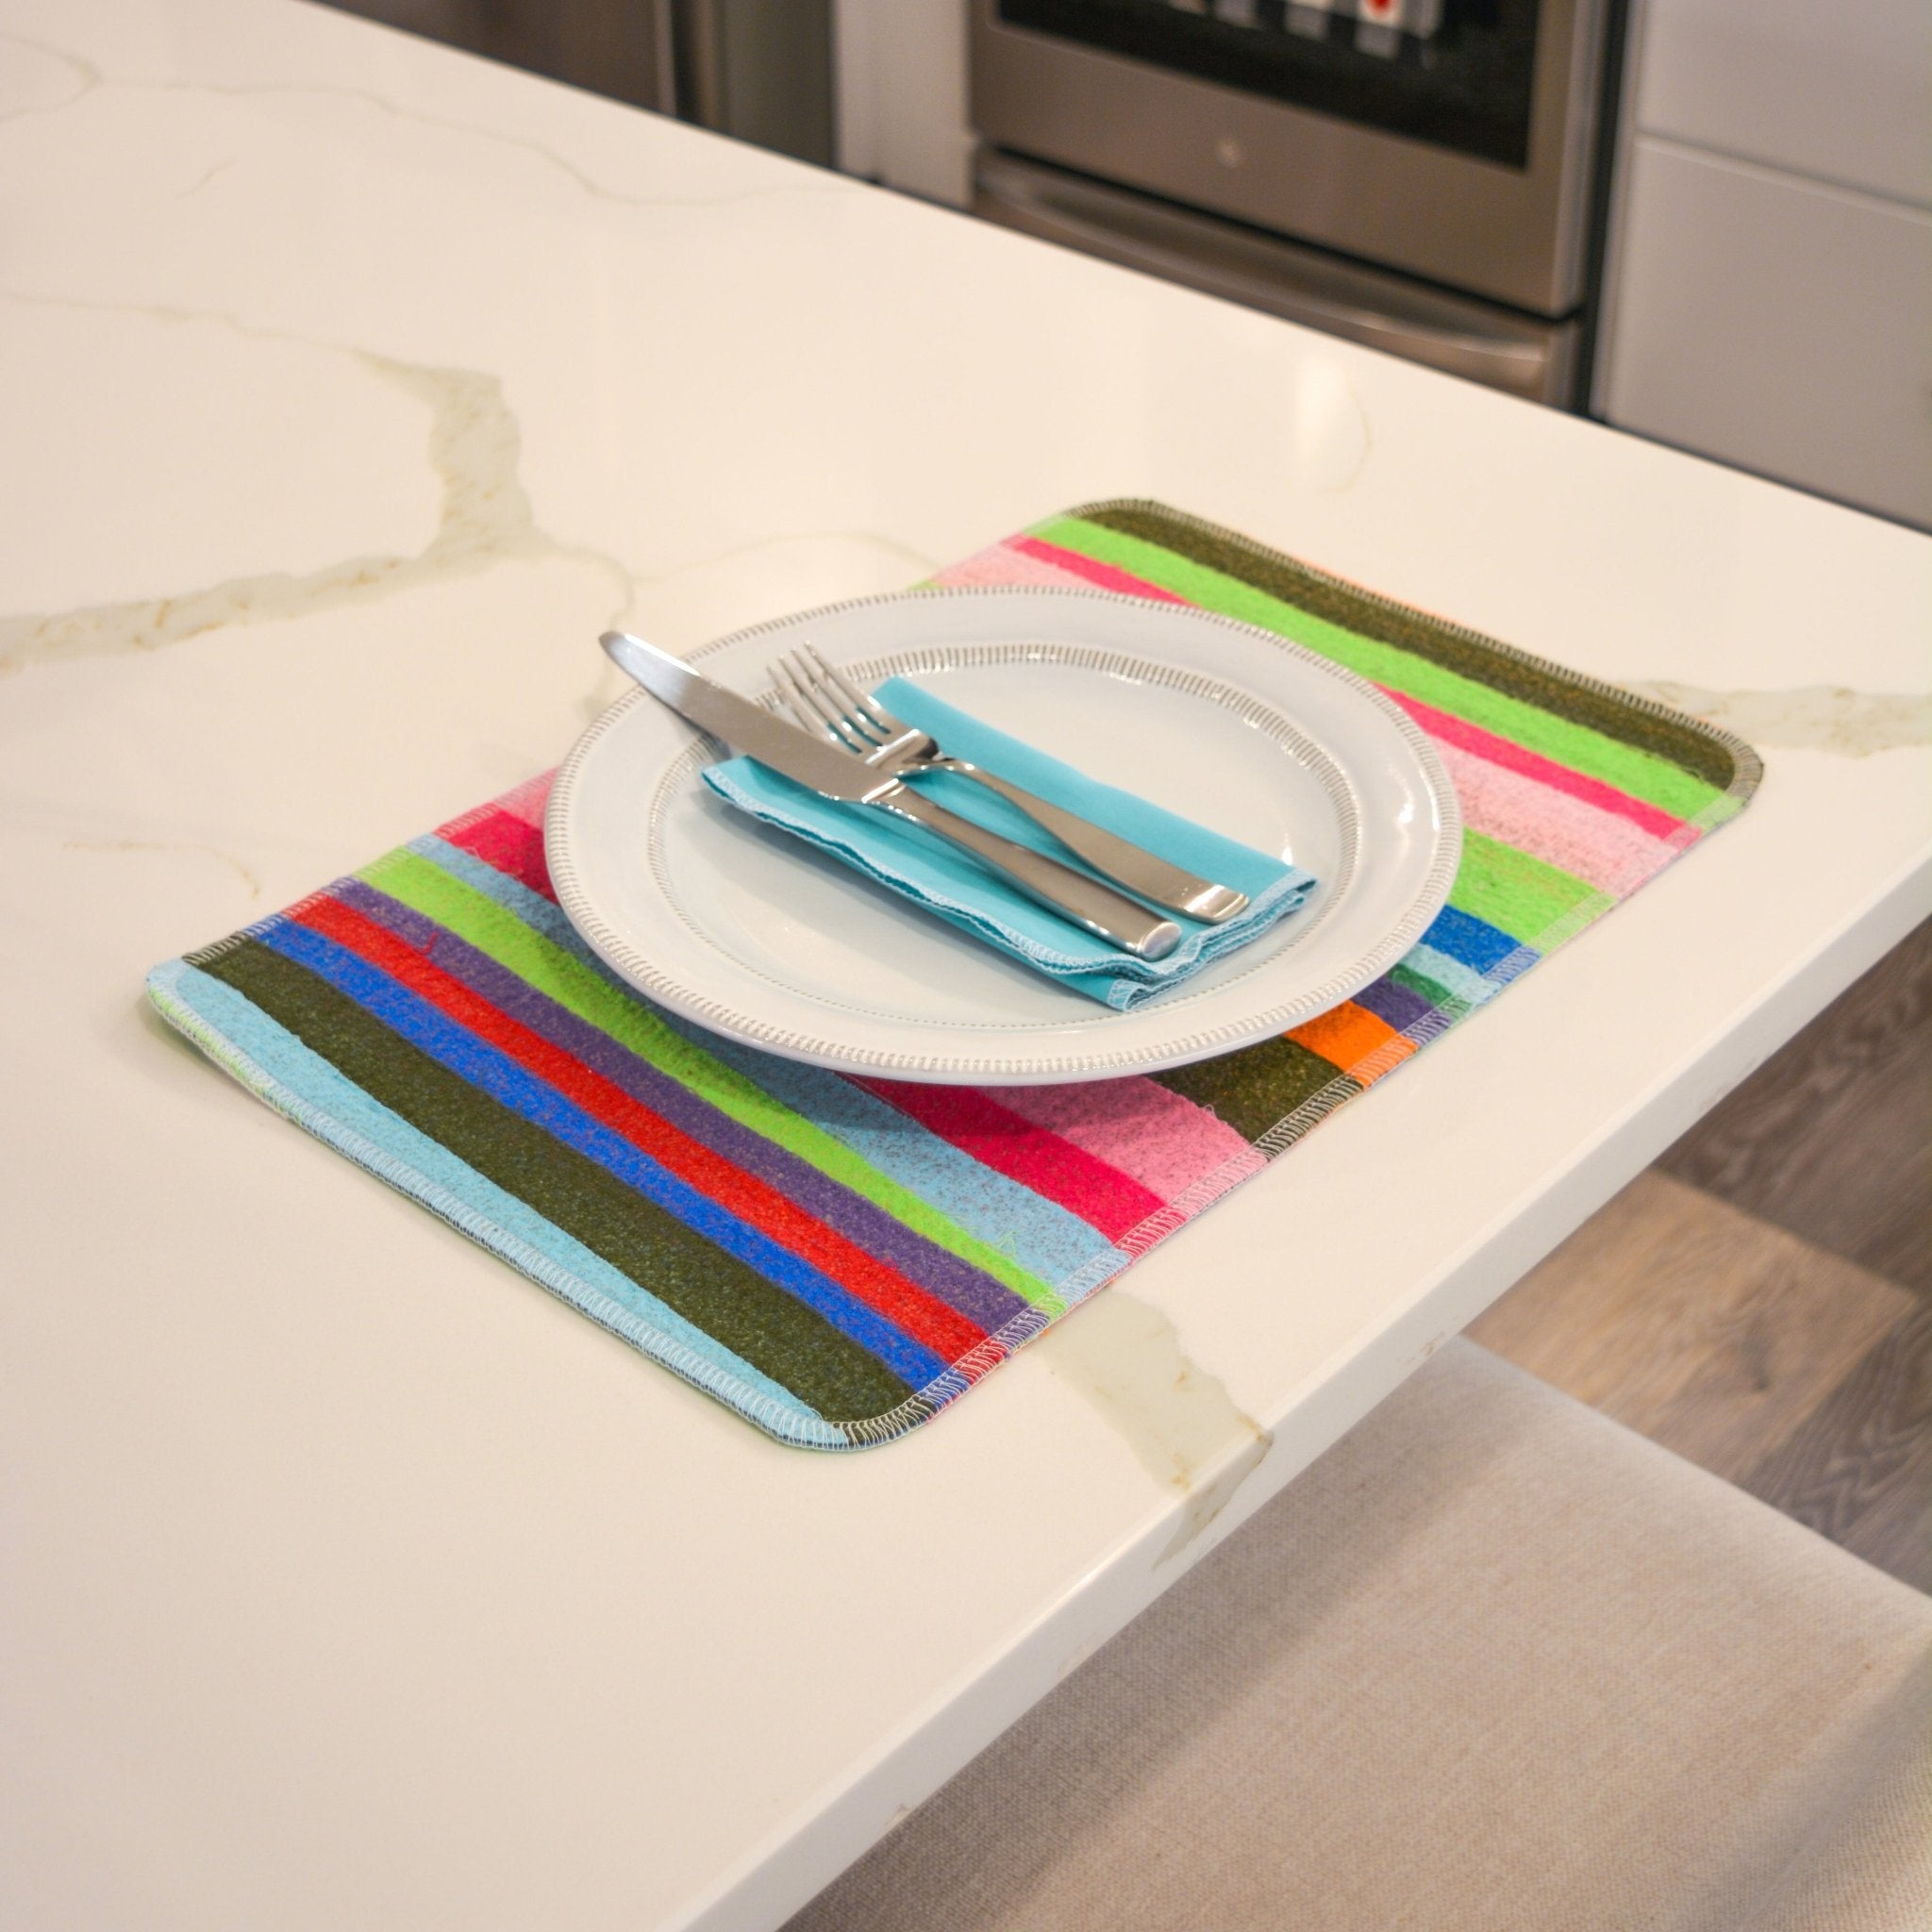 How to use your fabric scraps to sew a fun dish drying mat. 